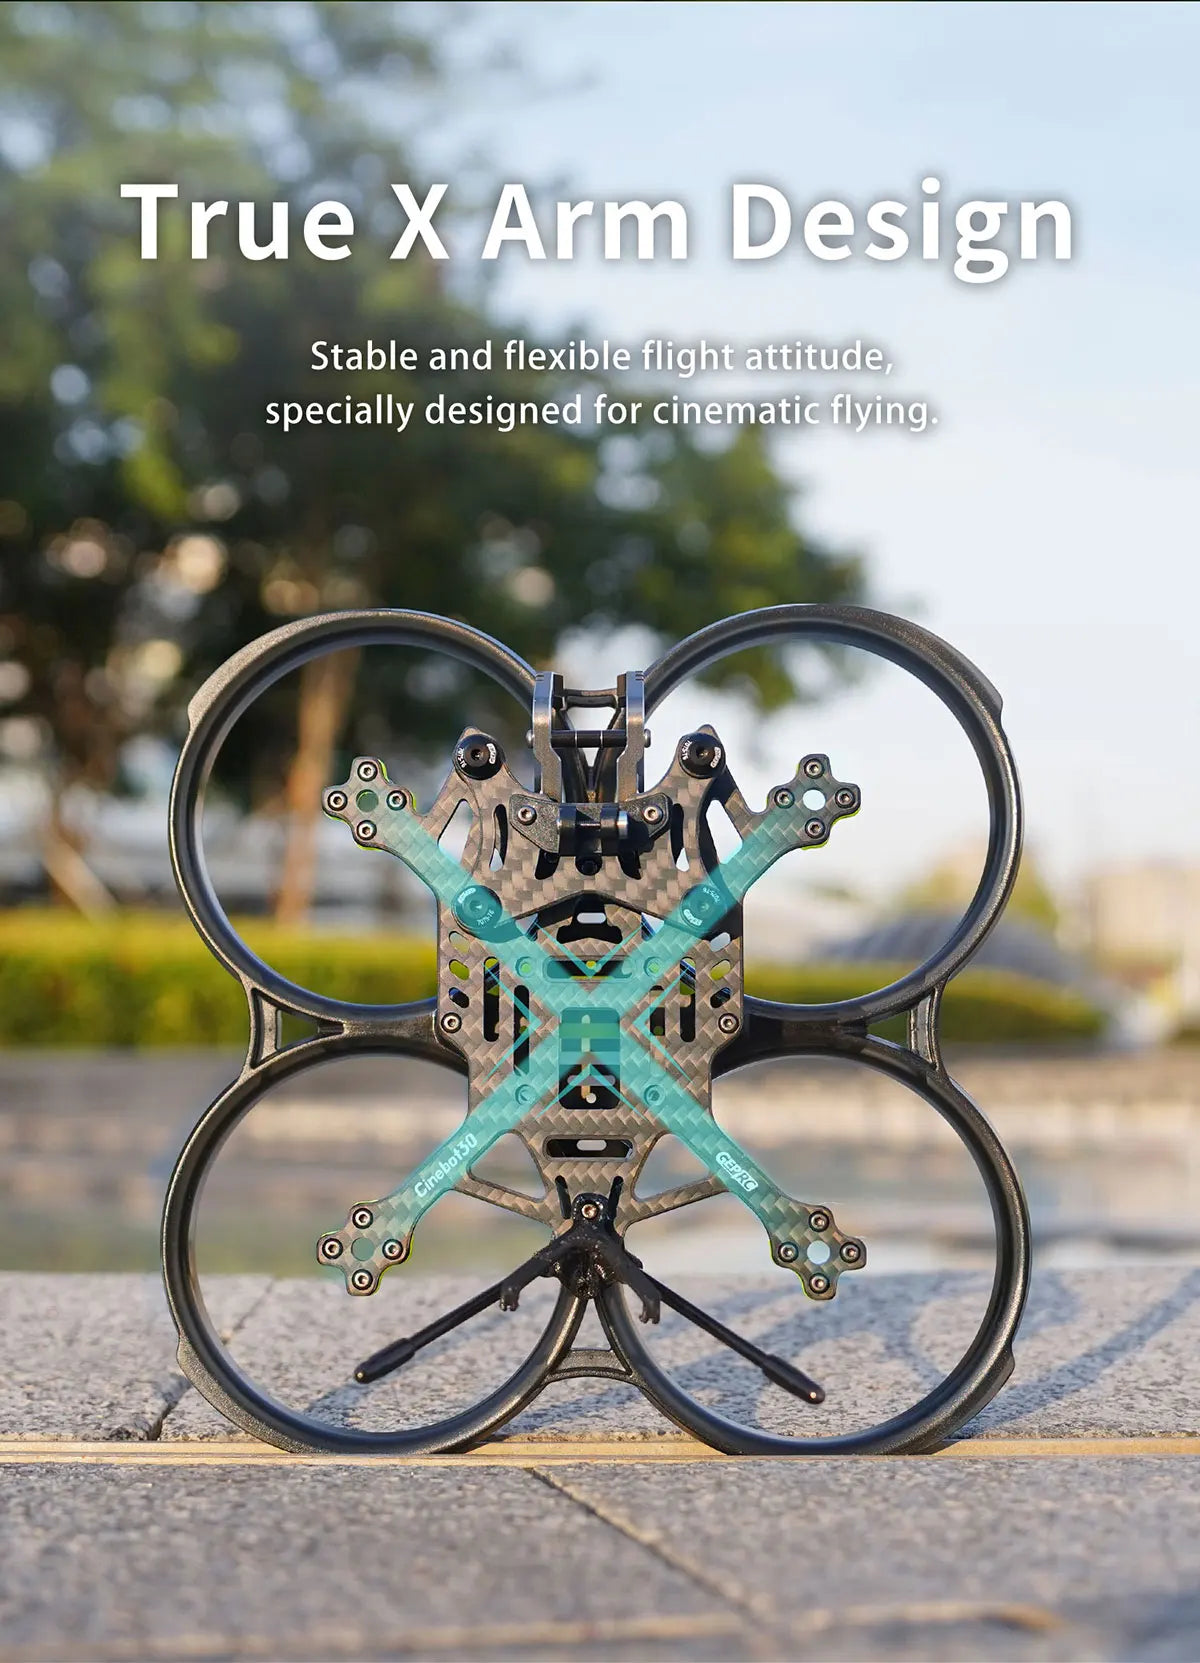 True X Arm Design Stable and flexible flight attitude; specially designed for cinematic flying: